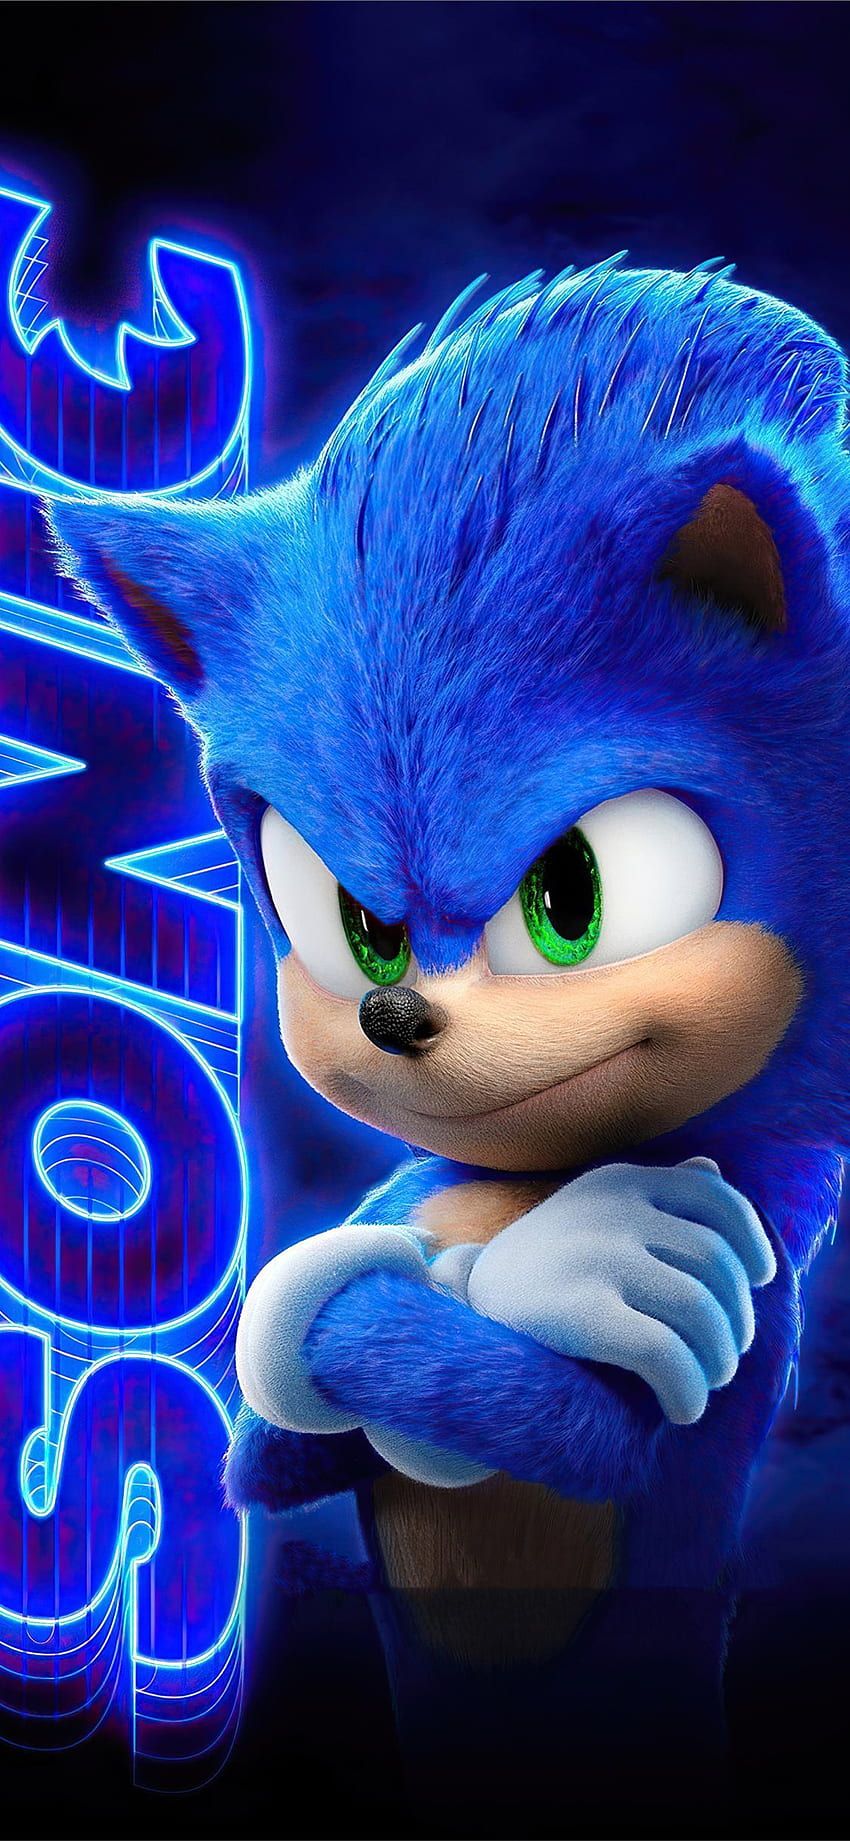 Sonic the hedgehog 2020, sonic, sonic movie, 4k, android wallpaper - Sonic